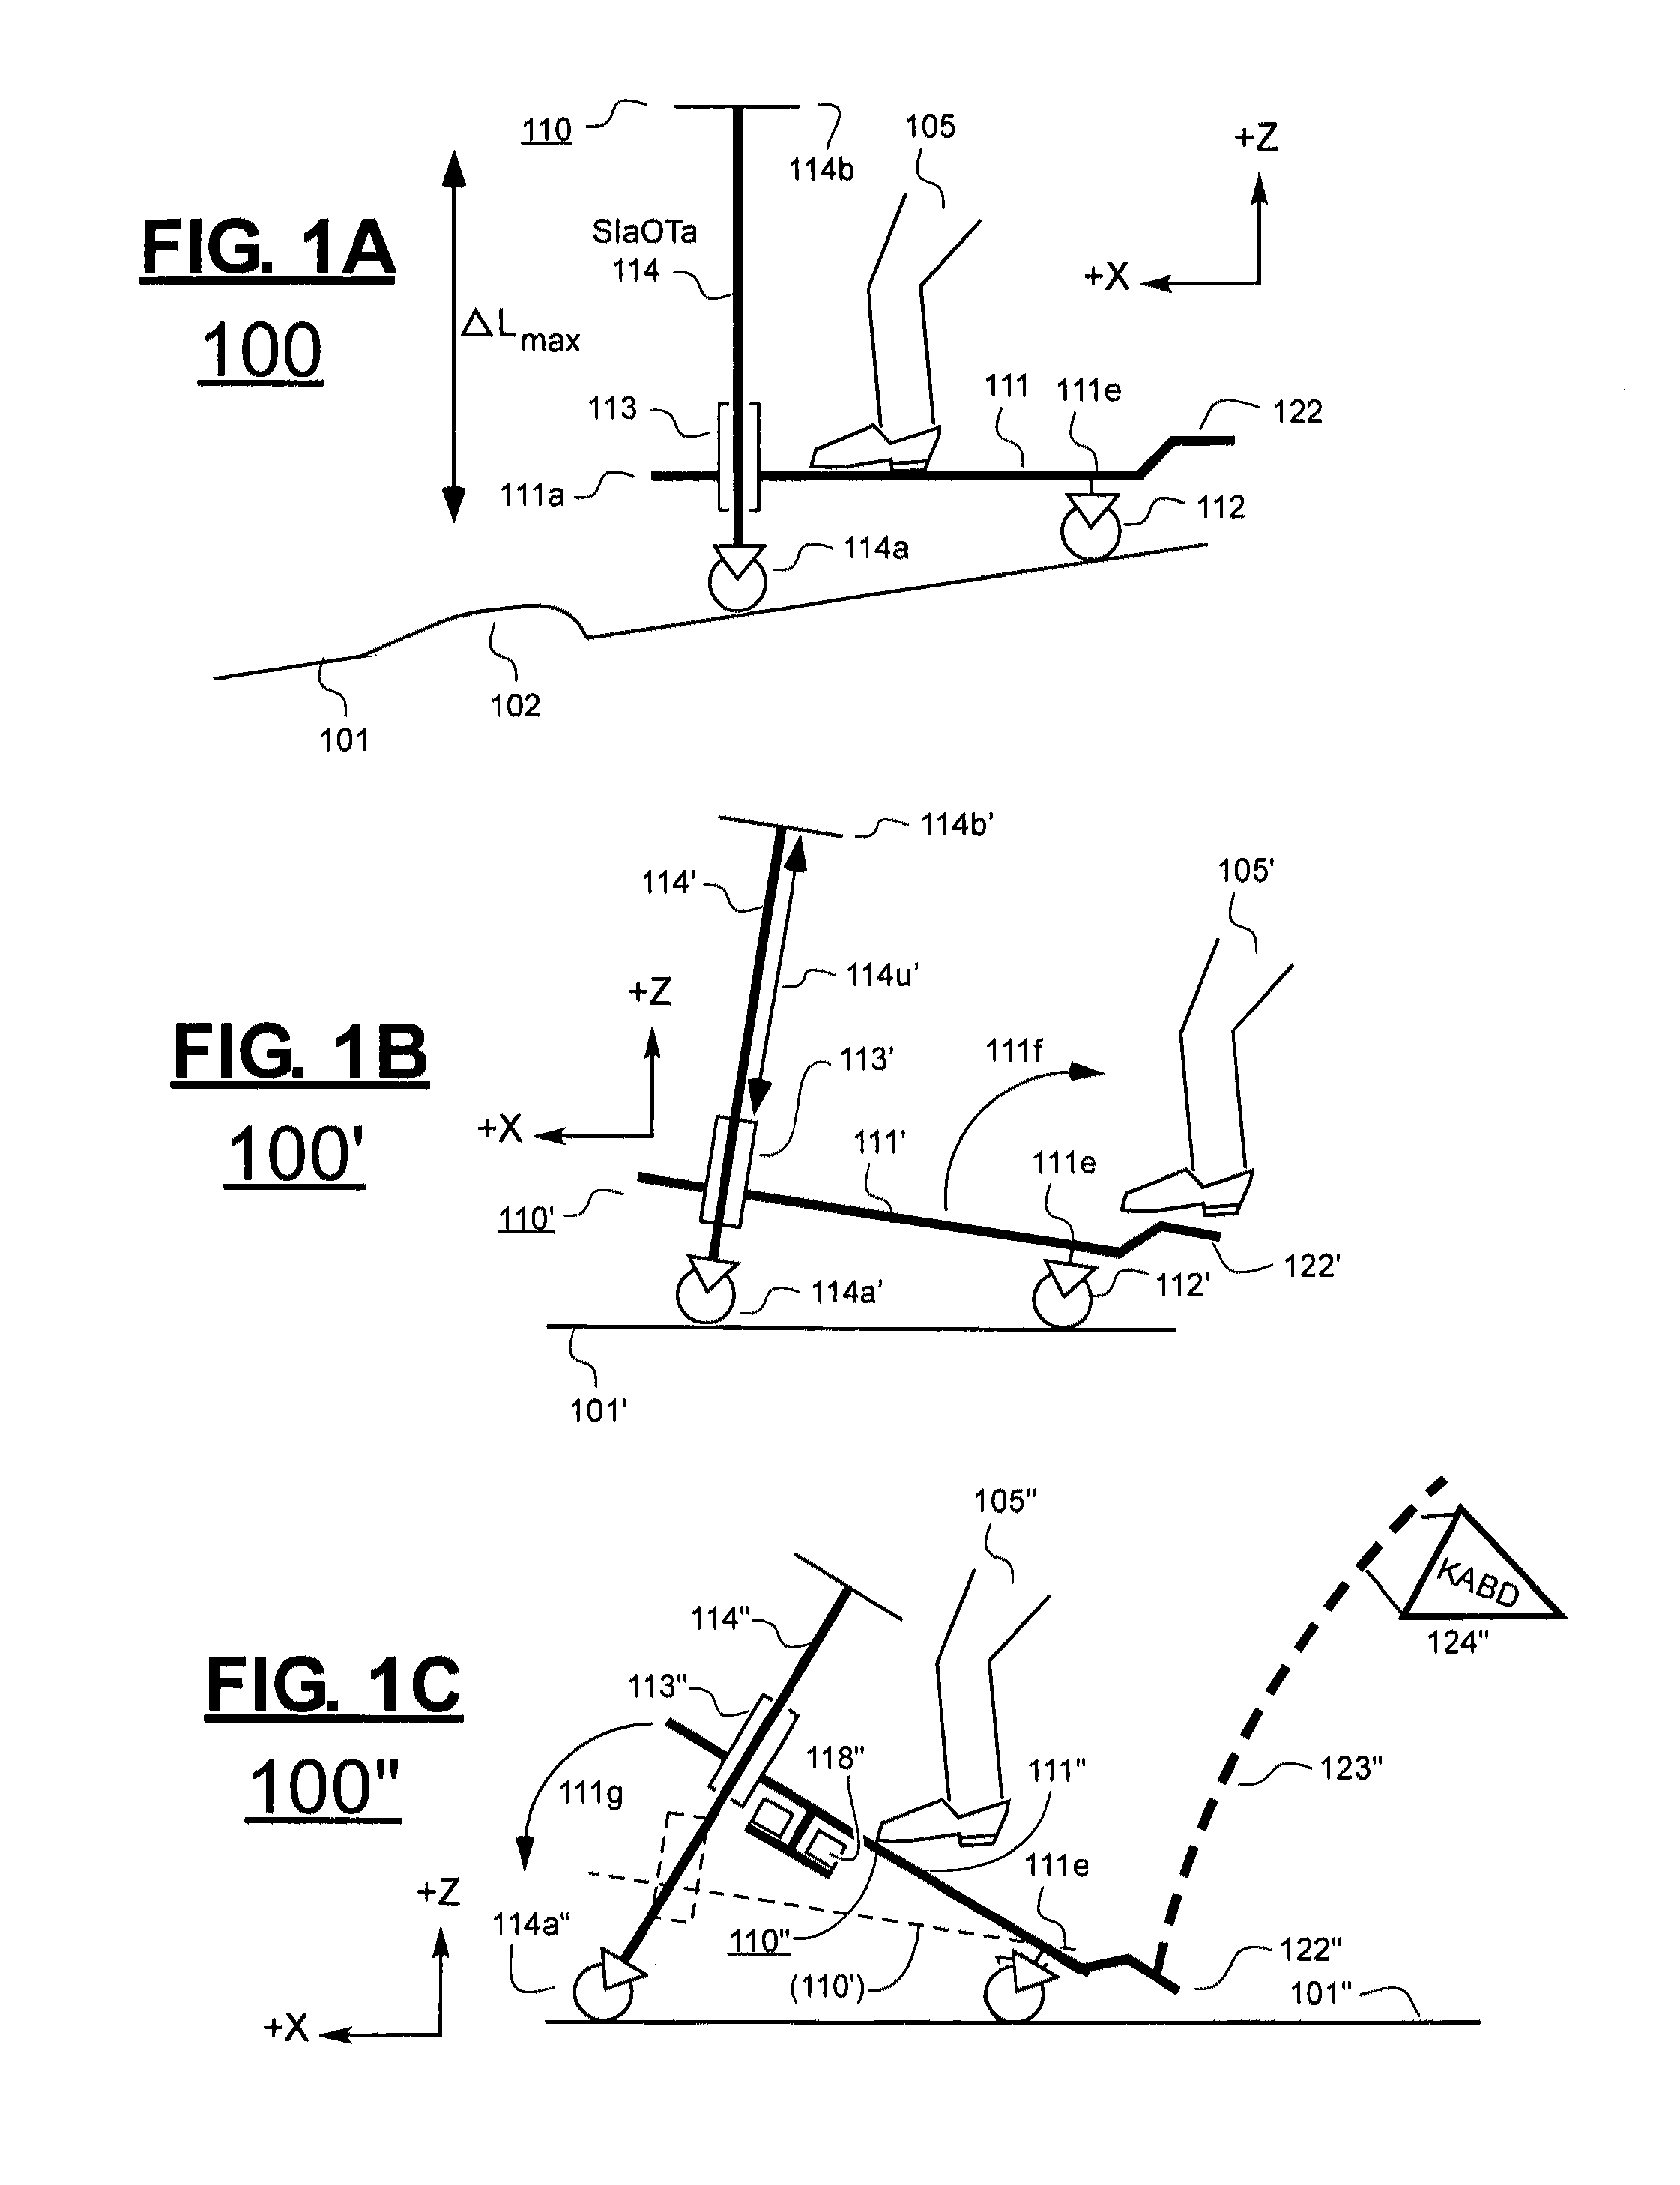 Transportation device with reciprocating part and kinetic storage